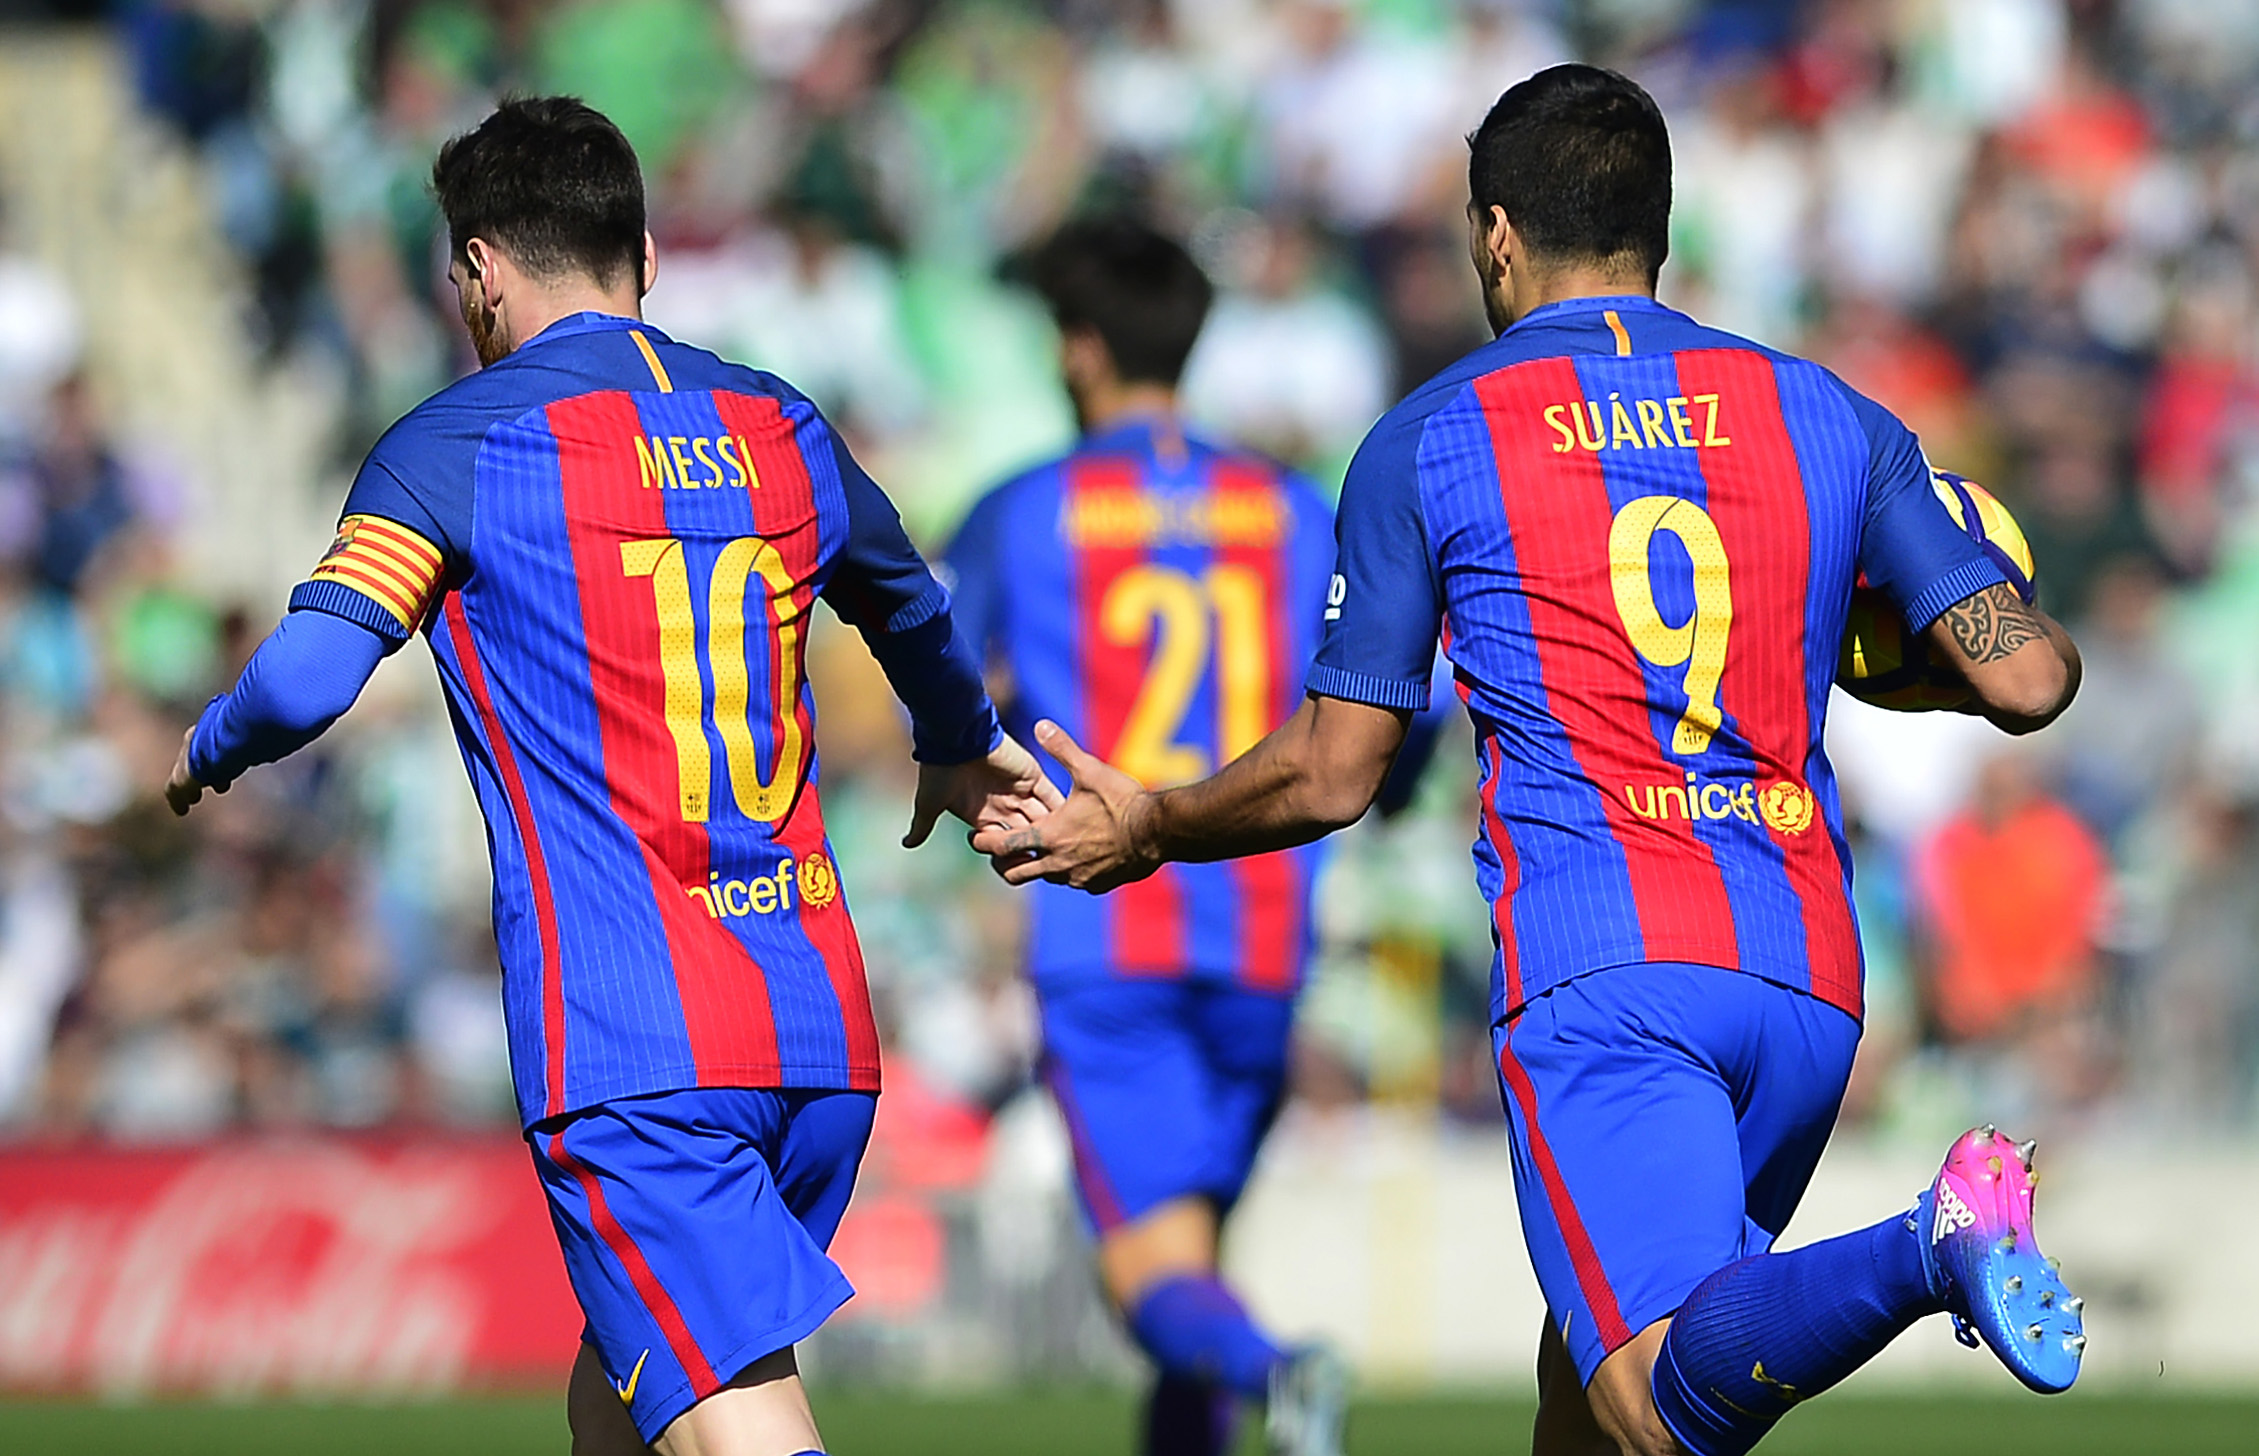 Barcelona's Uruguayan forward Luis Suarez (R) celebrates a goal with Barcelona's Argentinian forward Lionel Messi (L) during the Spanish league football match Real Betis vs FC Barcelona at the Benito Villamarin stadium in Sevilla on January 29, 2017. / AFP / CRISTINA QUICLER        (Photo credit should read CRISTINA QUICLER/AFP/Getty Images)